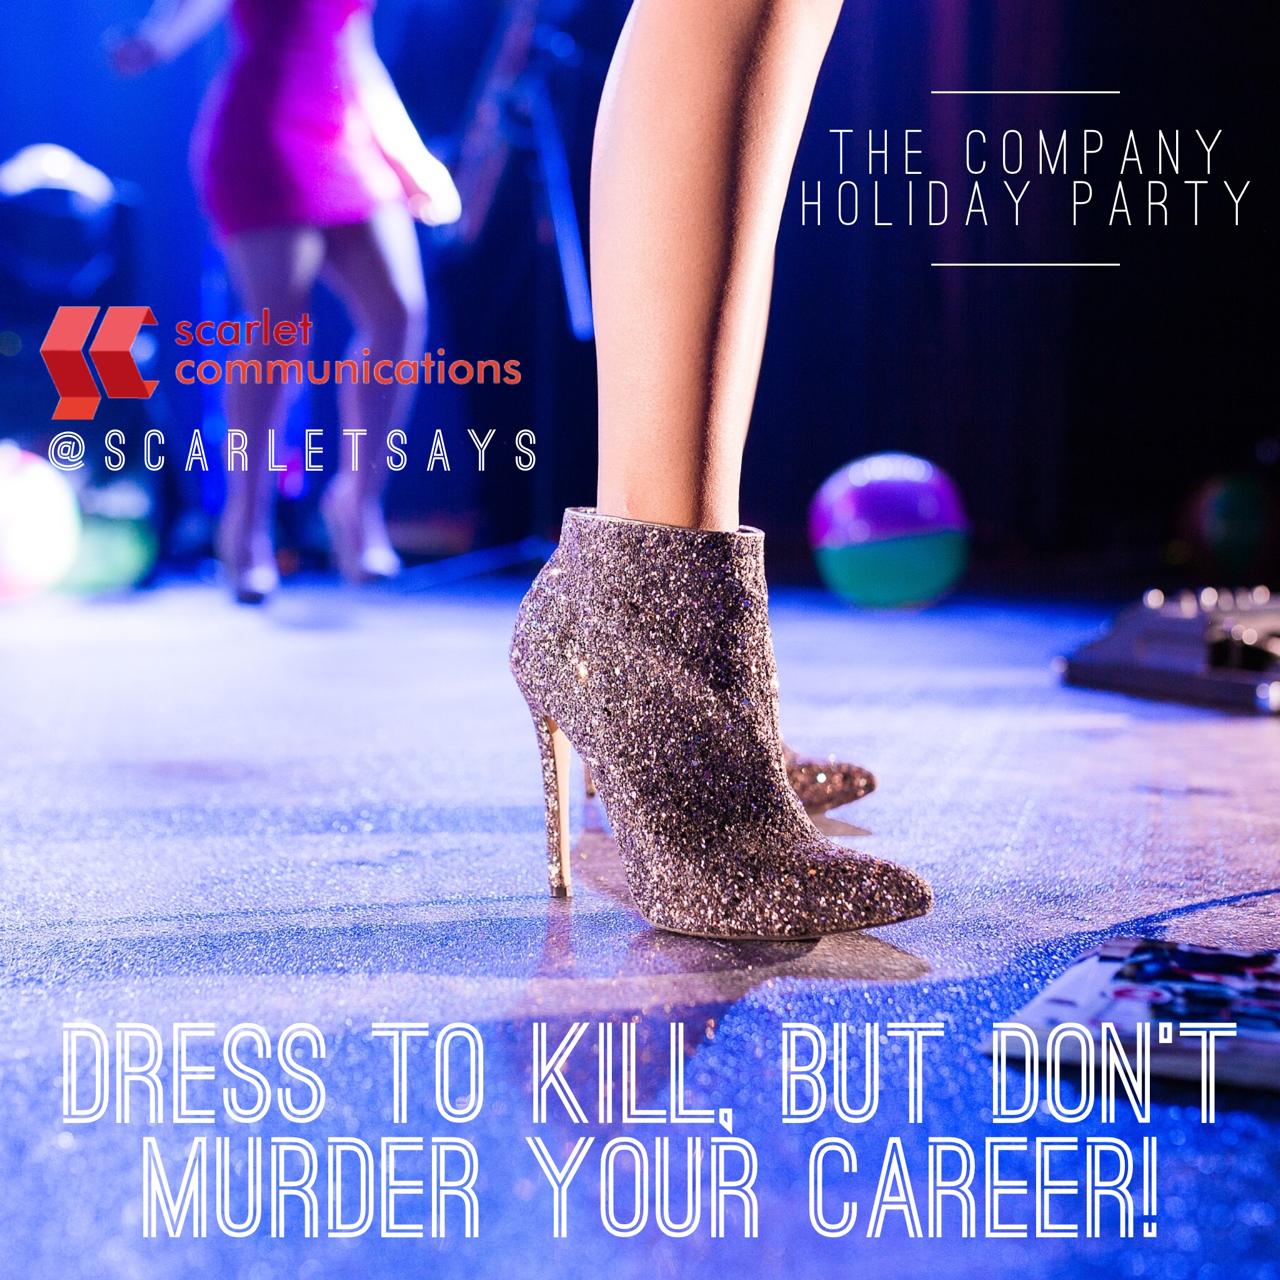 You Can Survive The Company Holiday Party!